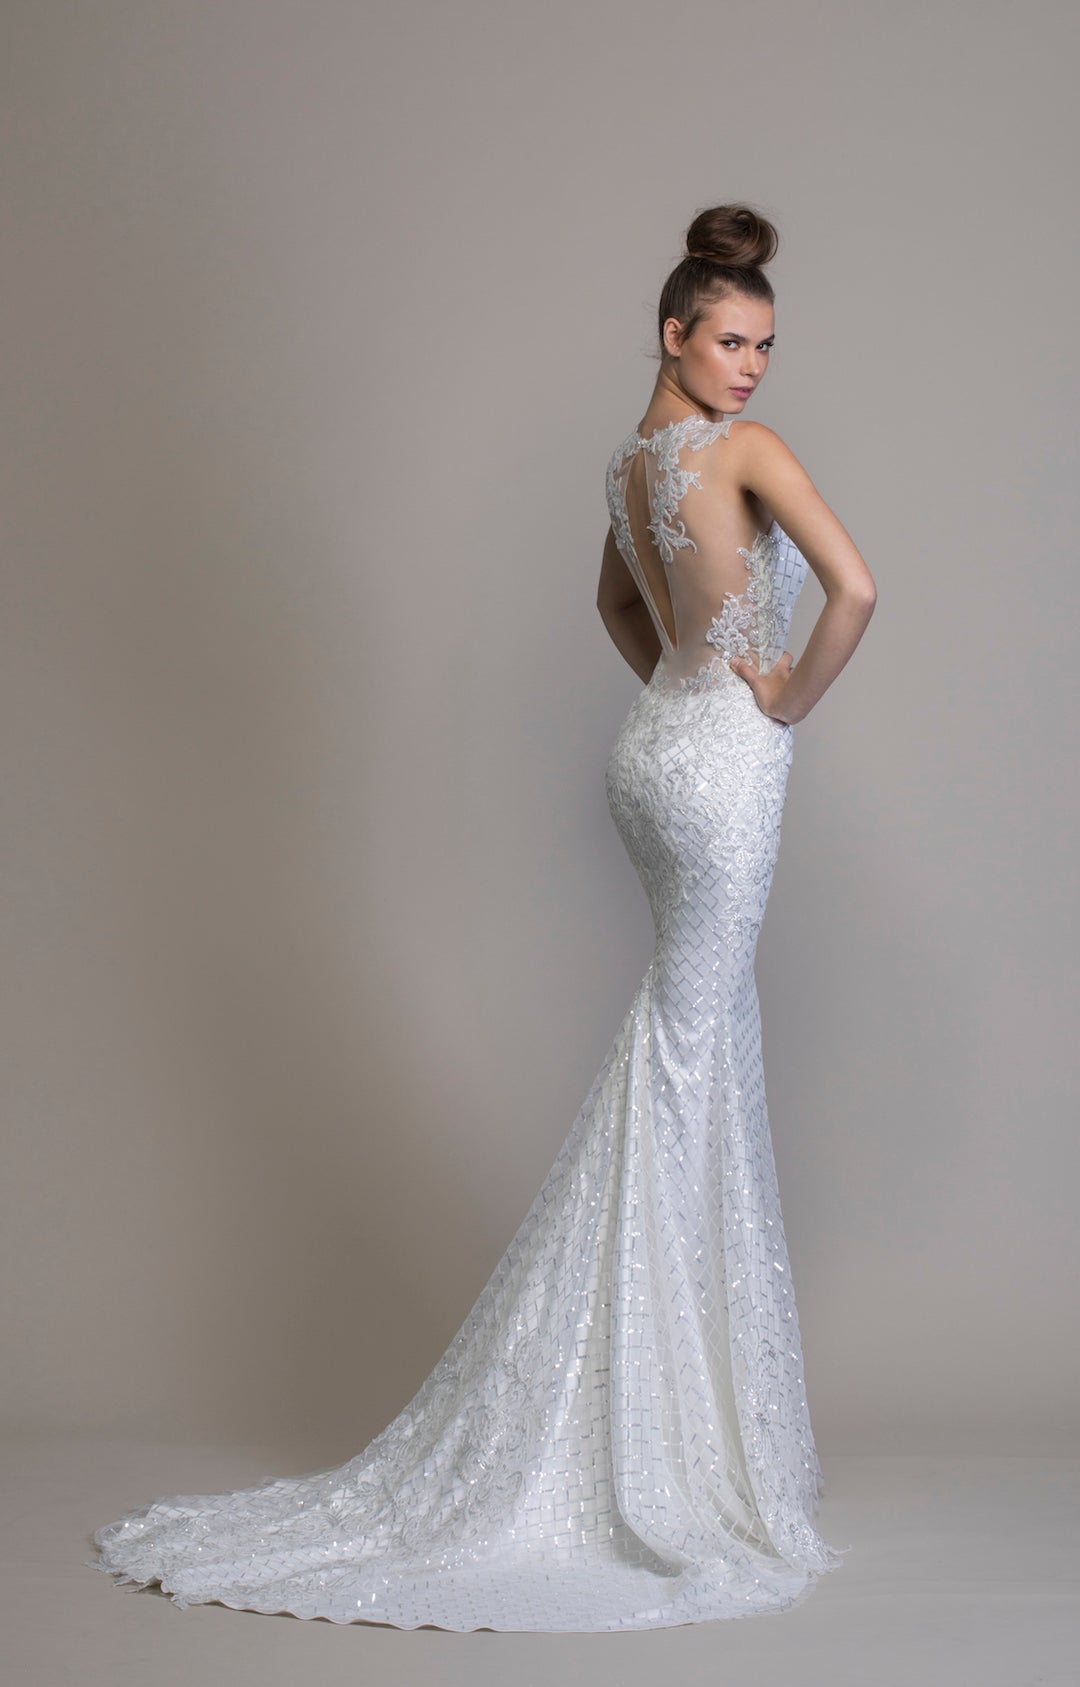 Pnina Tornai's new LOVE 2020 Collection is out! This is style 14754